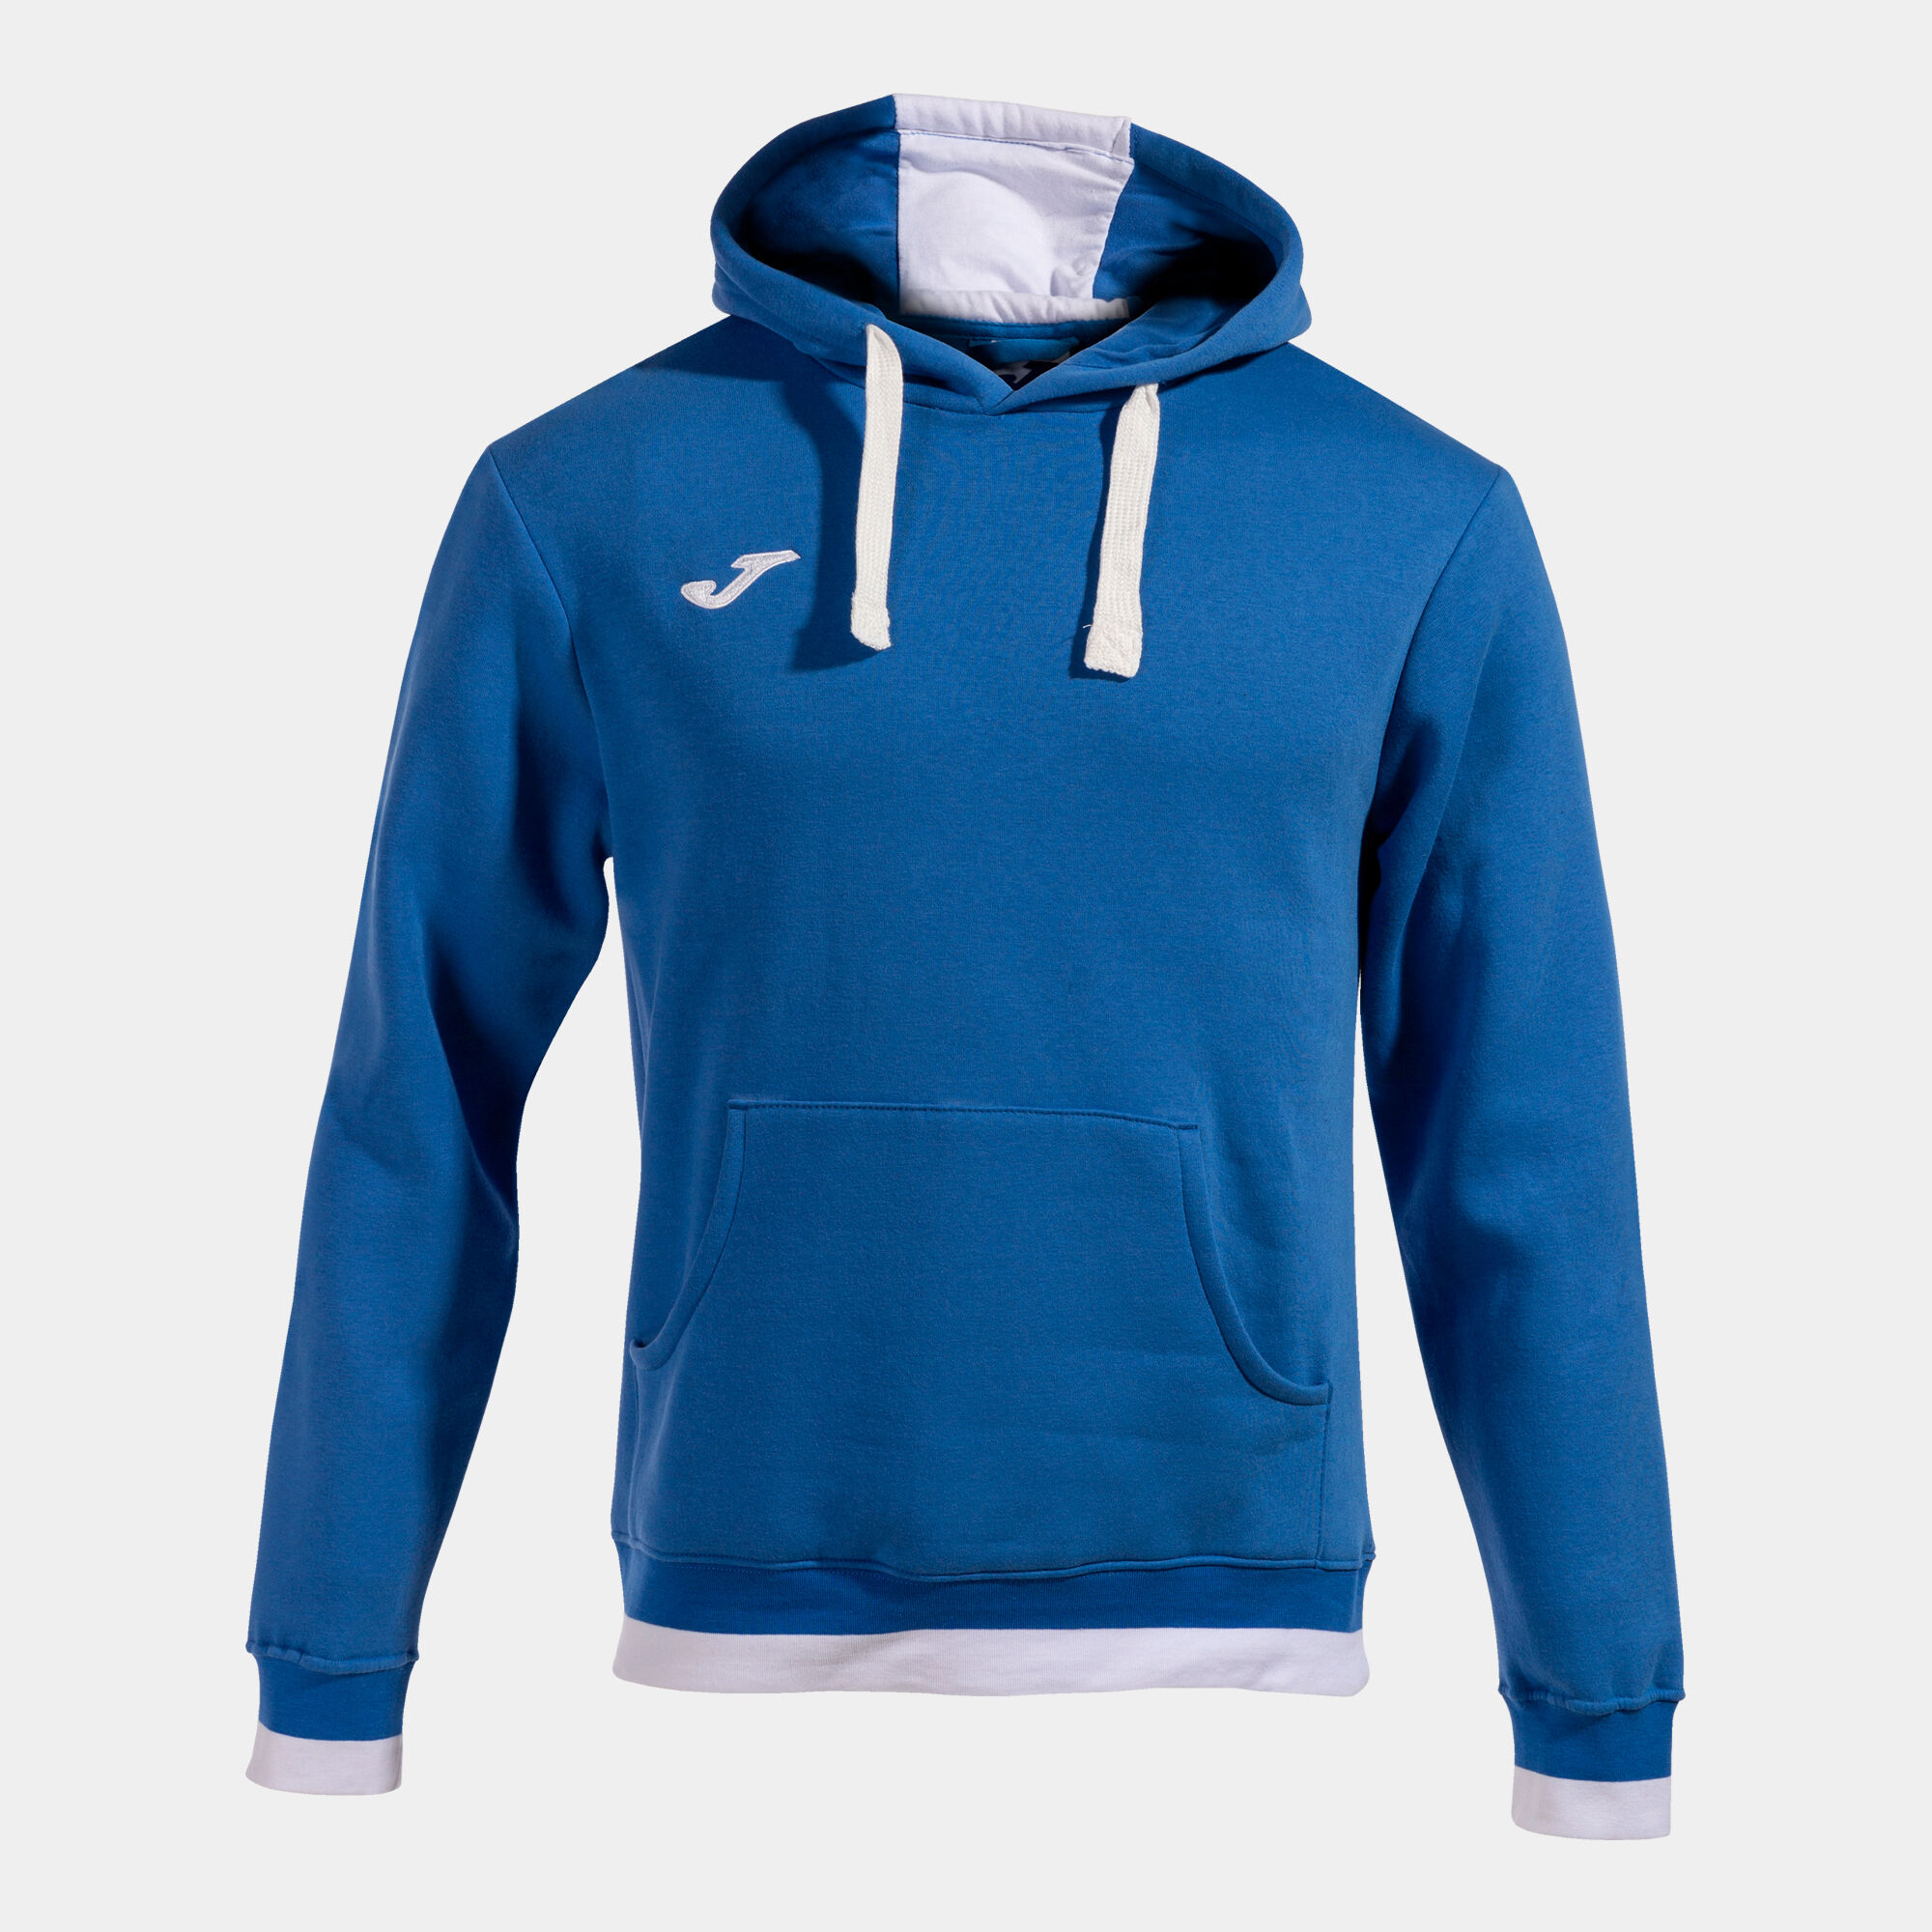 HOODED SWEATER MAN CONFORT II ROYAL BLUE WHITE